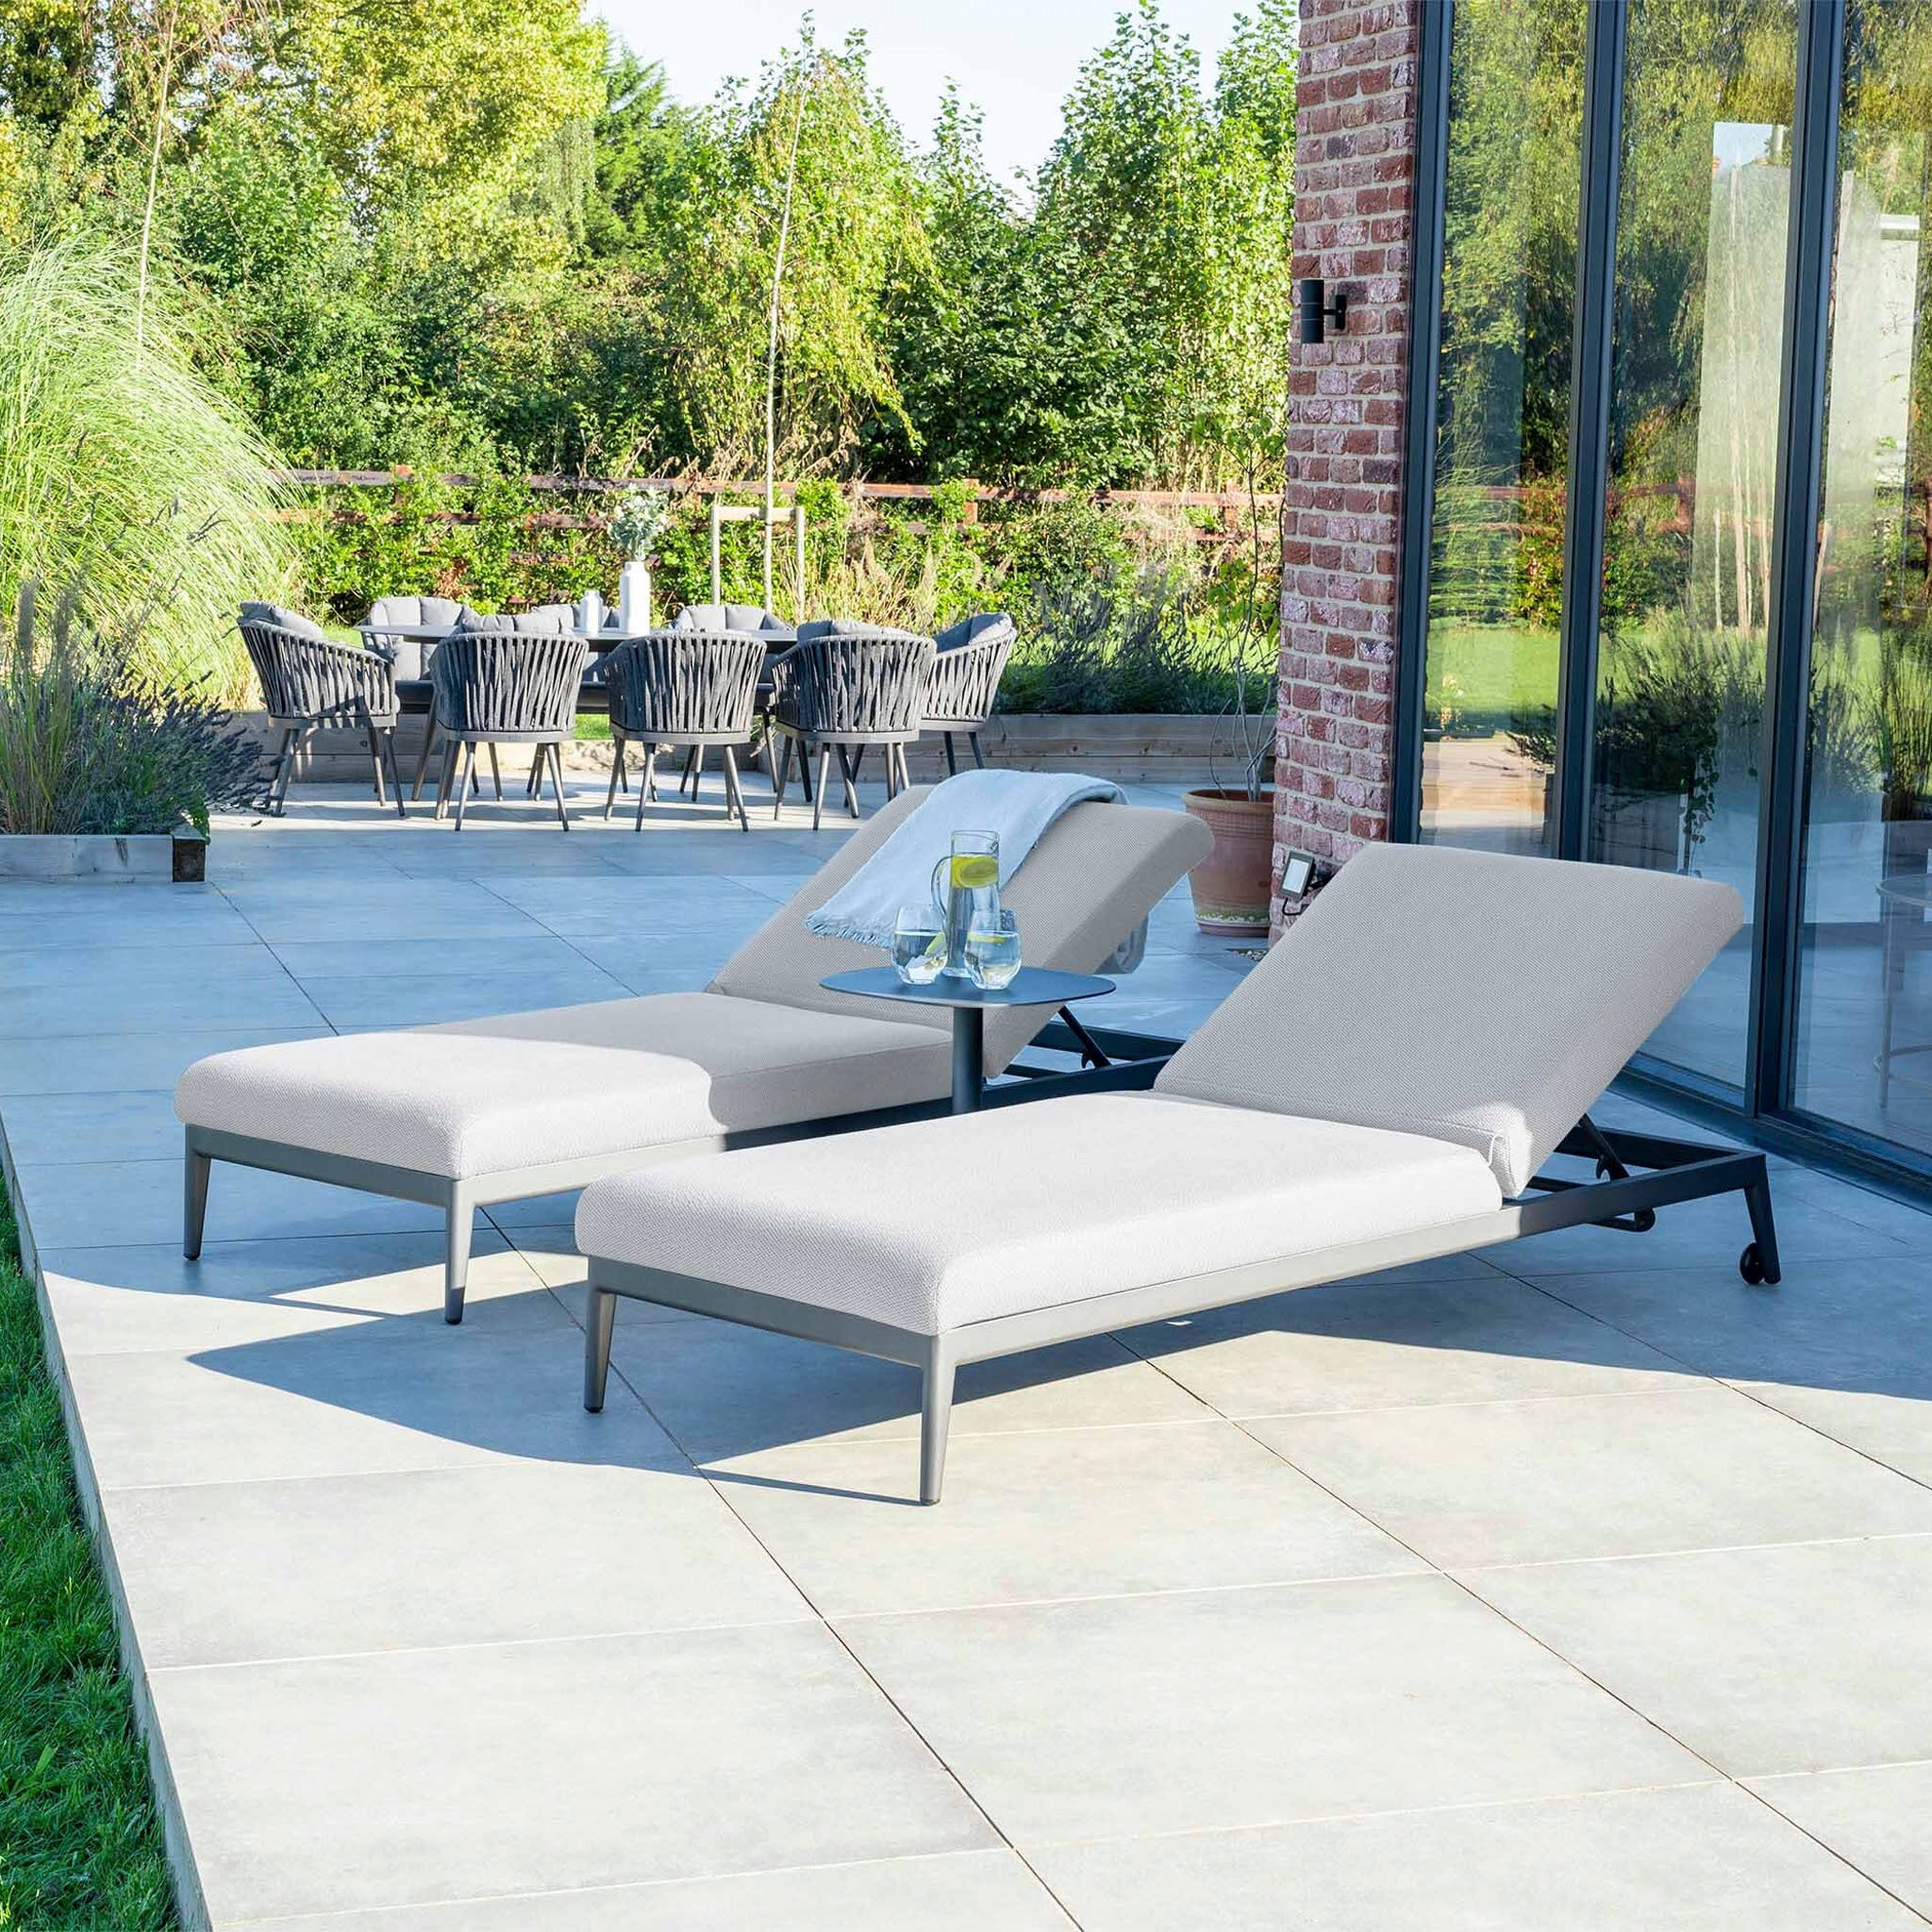 Luna Outdoor Fabric Sun Lounger in Oyster Grey